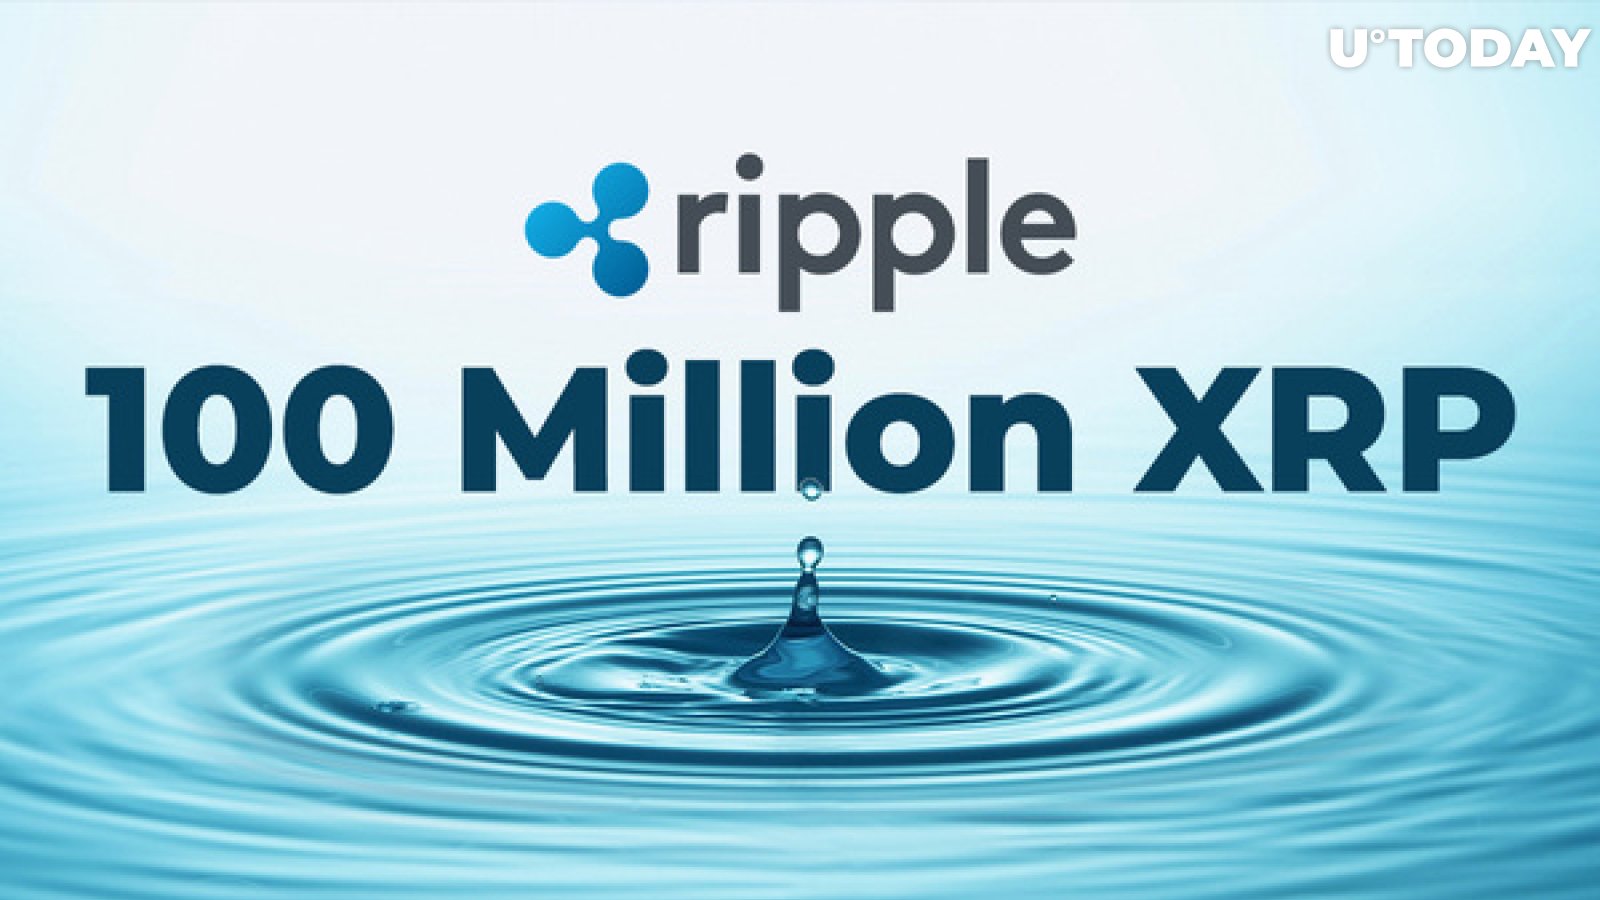 Ripple Releases 100 Million XRP, Here’s Why It May Be Sent to Huobi